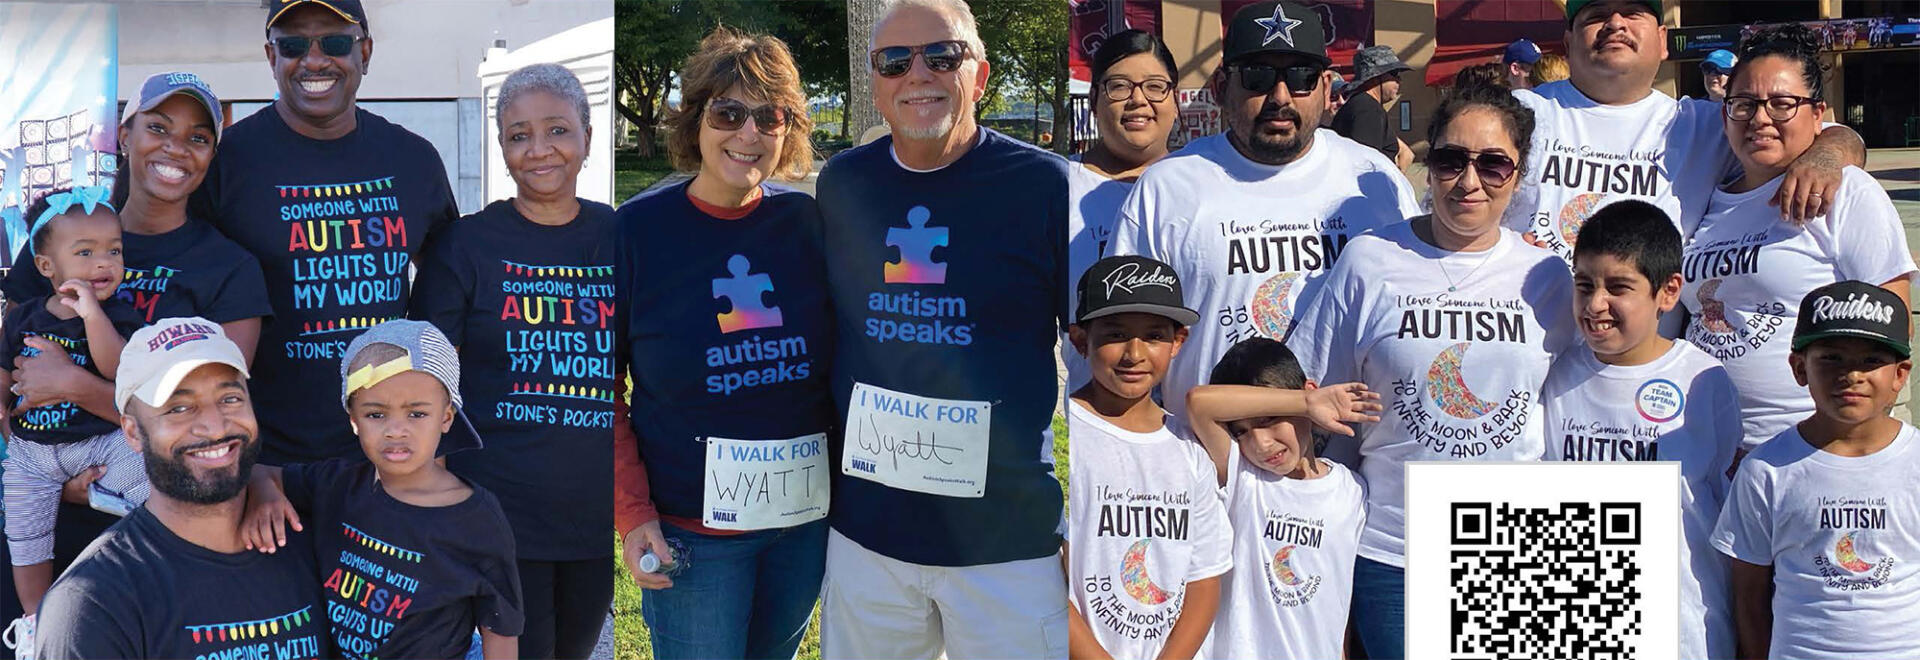 3B IT Services proudly supports Autism Speaks